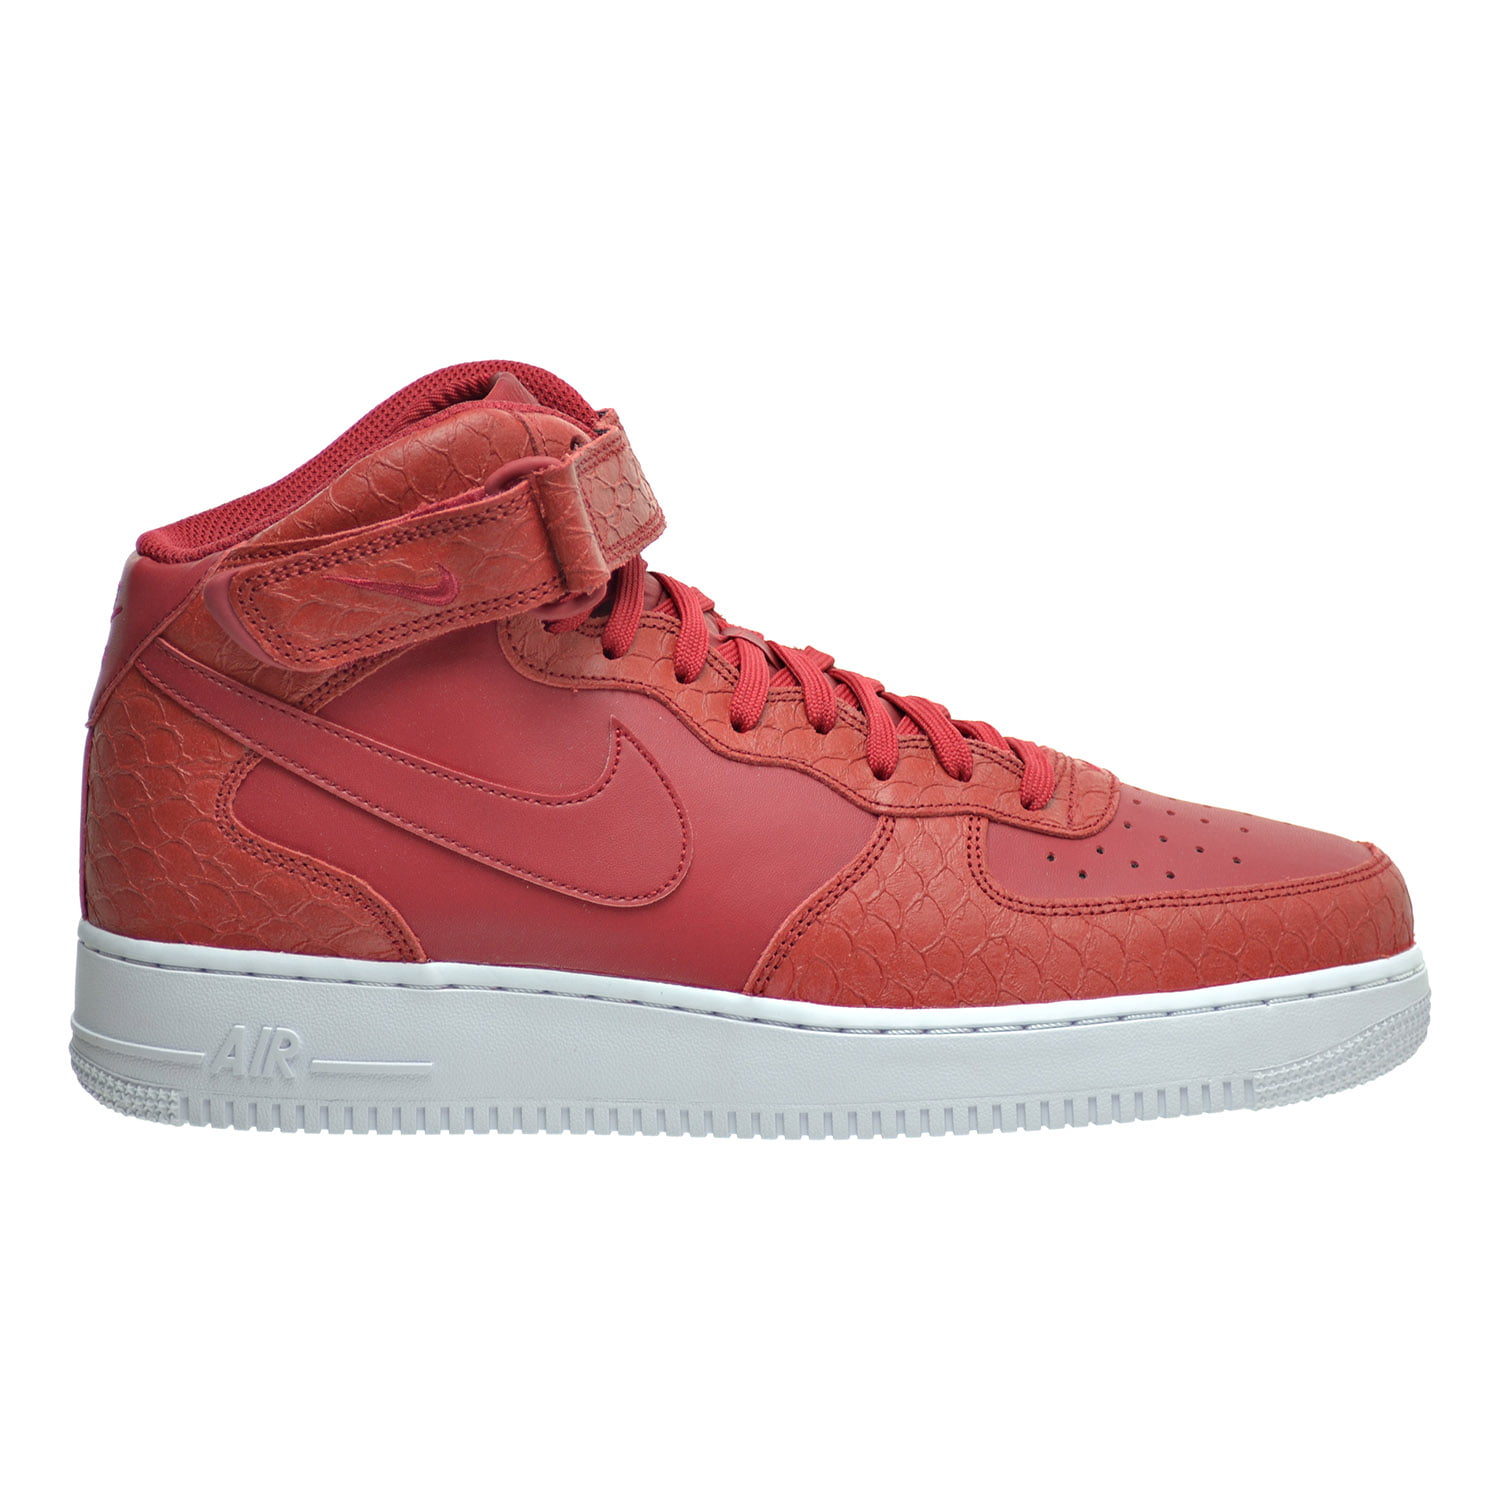 Nike Air Force 1 Mid '07 LV8 Men's Shoes Gym Red/White 804609-601 ...